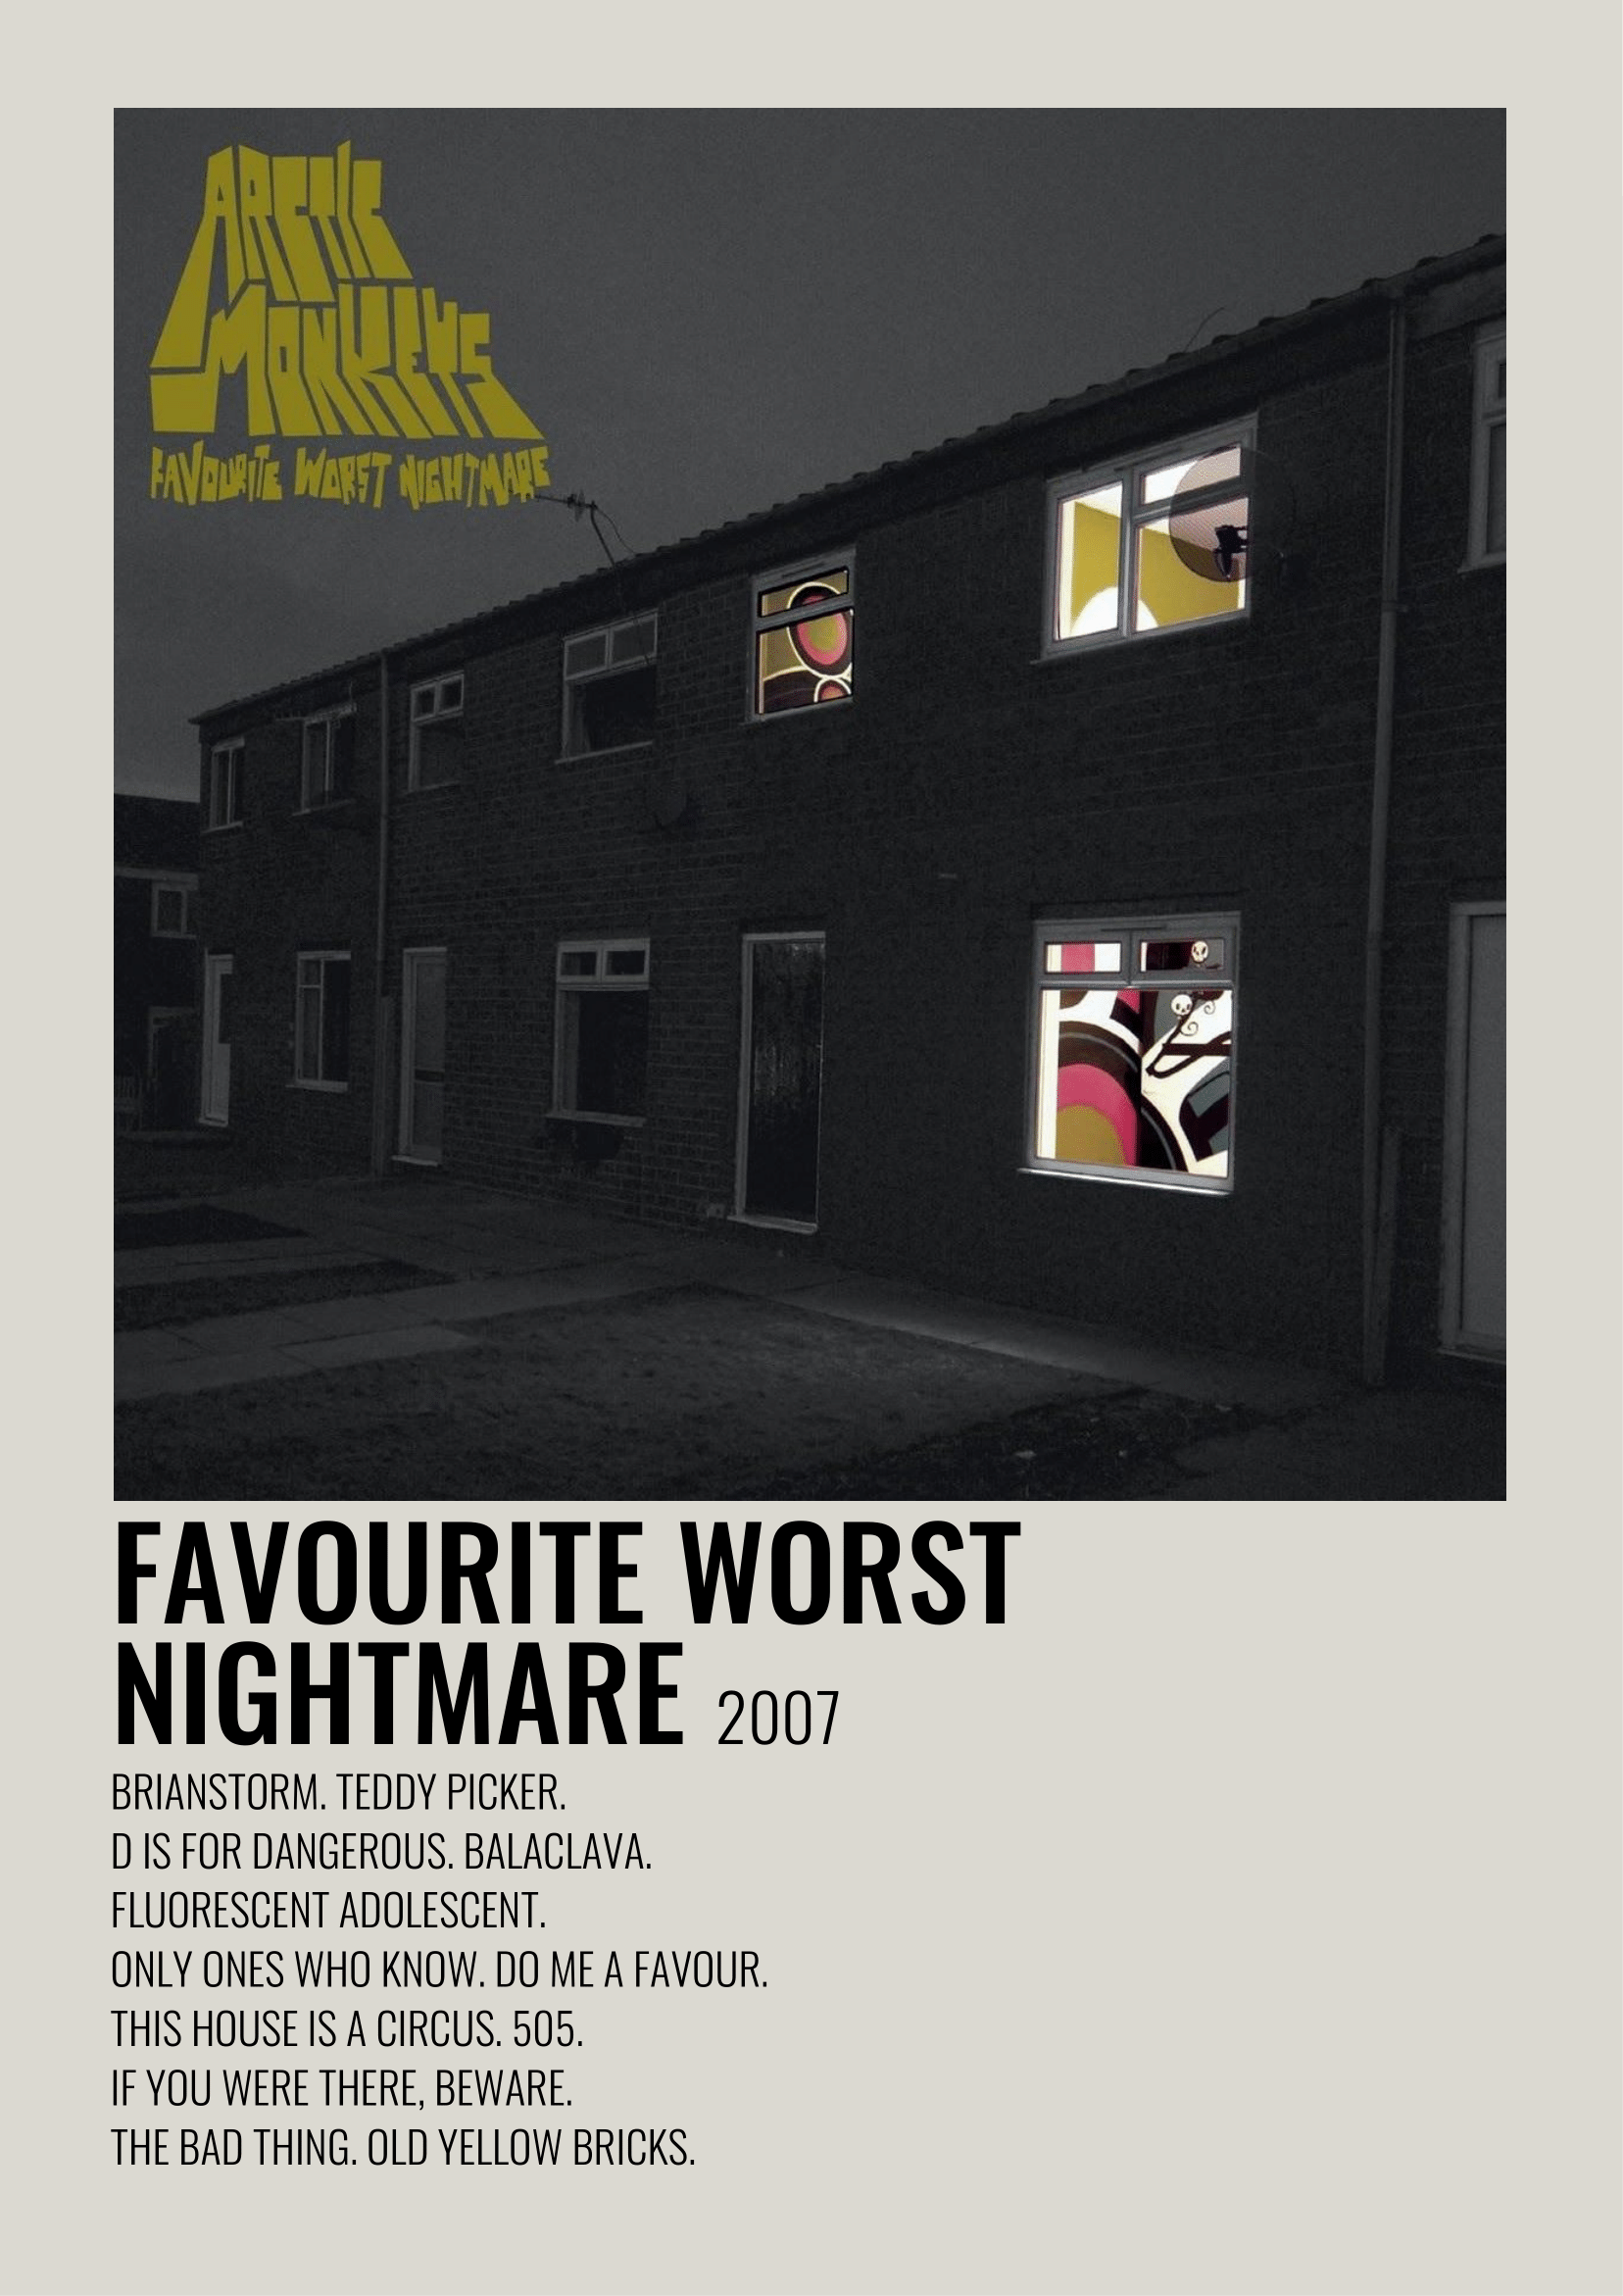 Arctic Monkeys Worst Nightmare. Music poster ideas, Music poster design, Movie poster wall